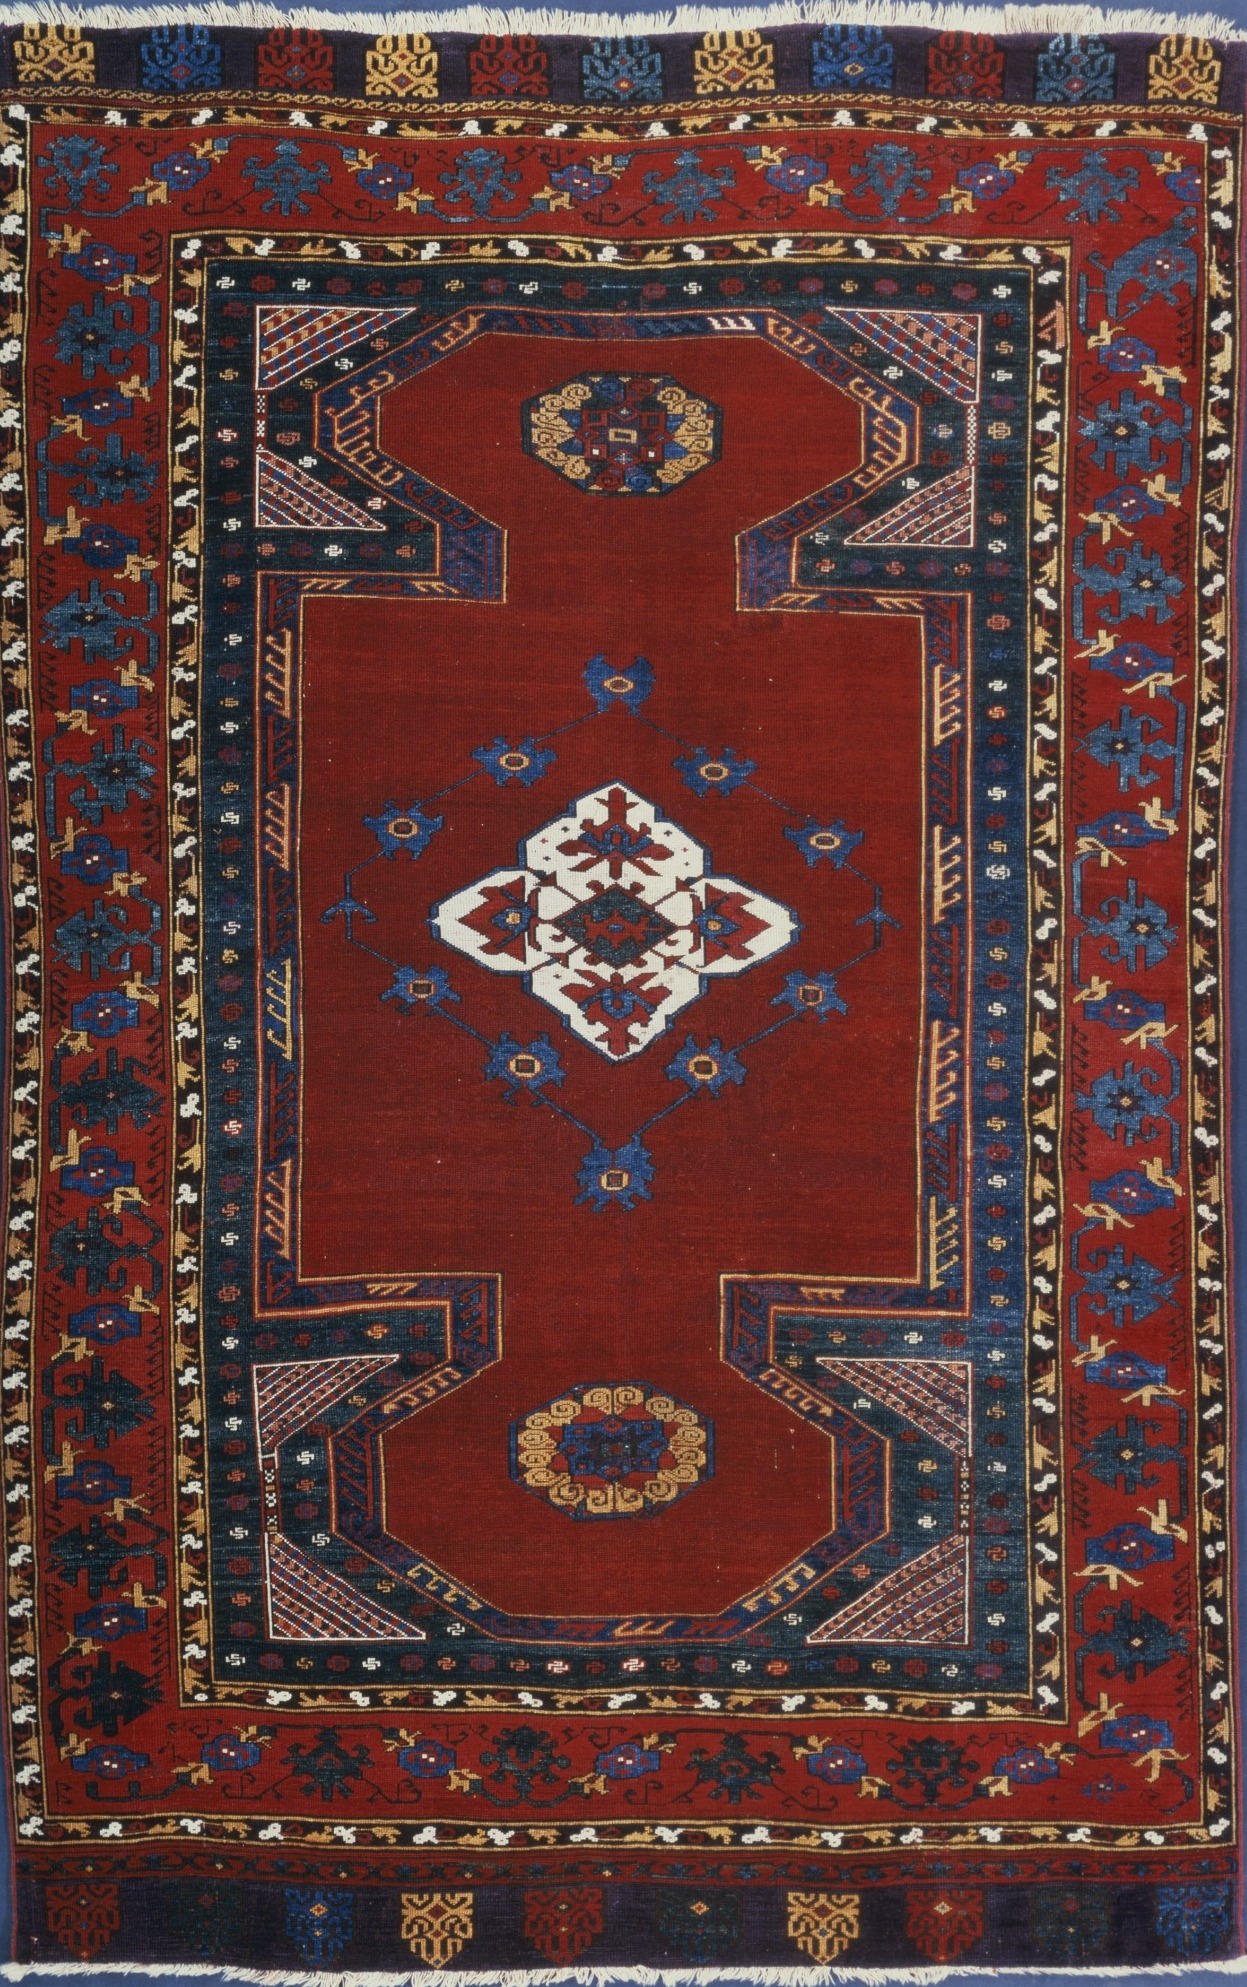 Anatolian Rug Wikipedia, What Is The Softest Rug Material In World